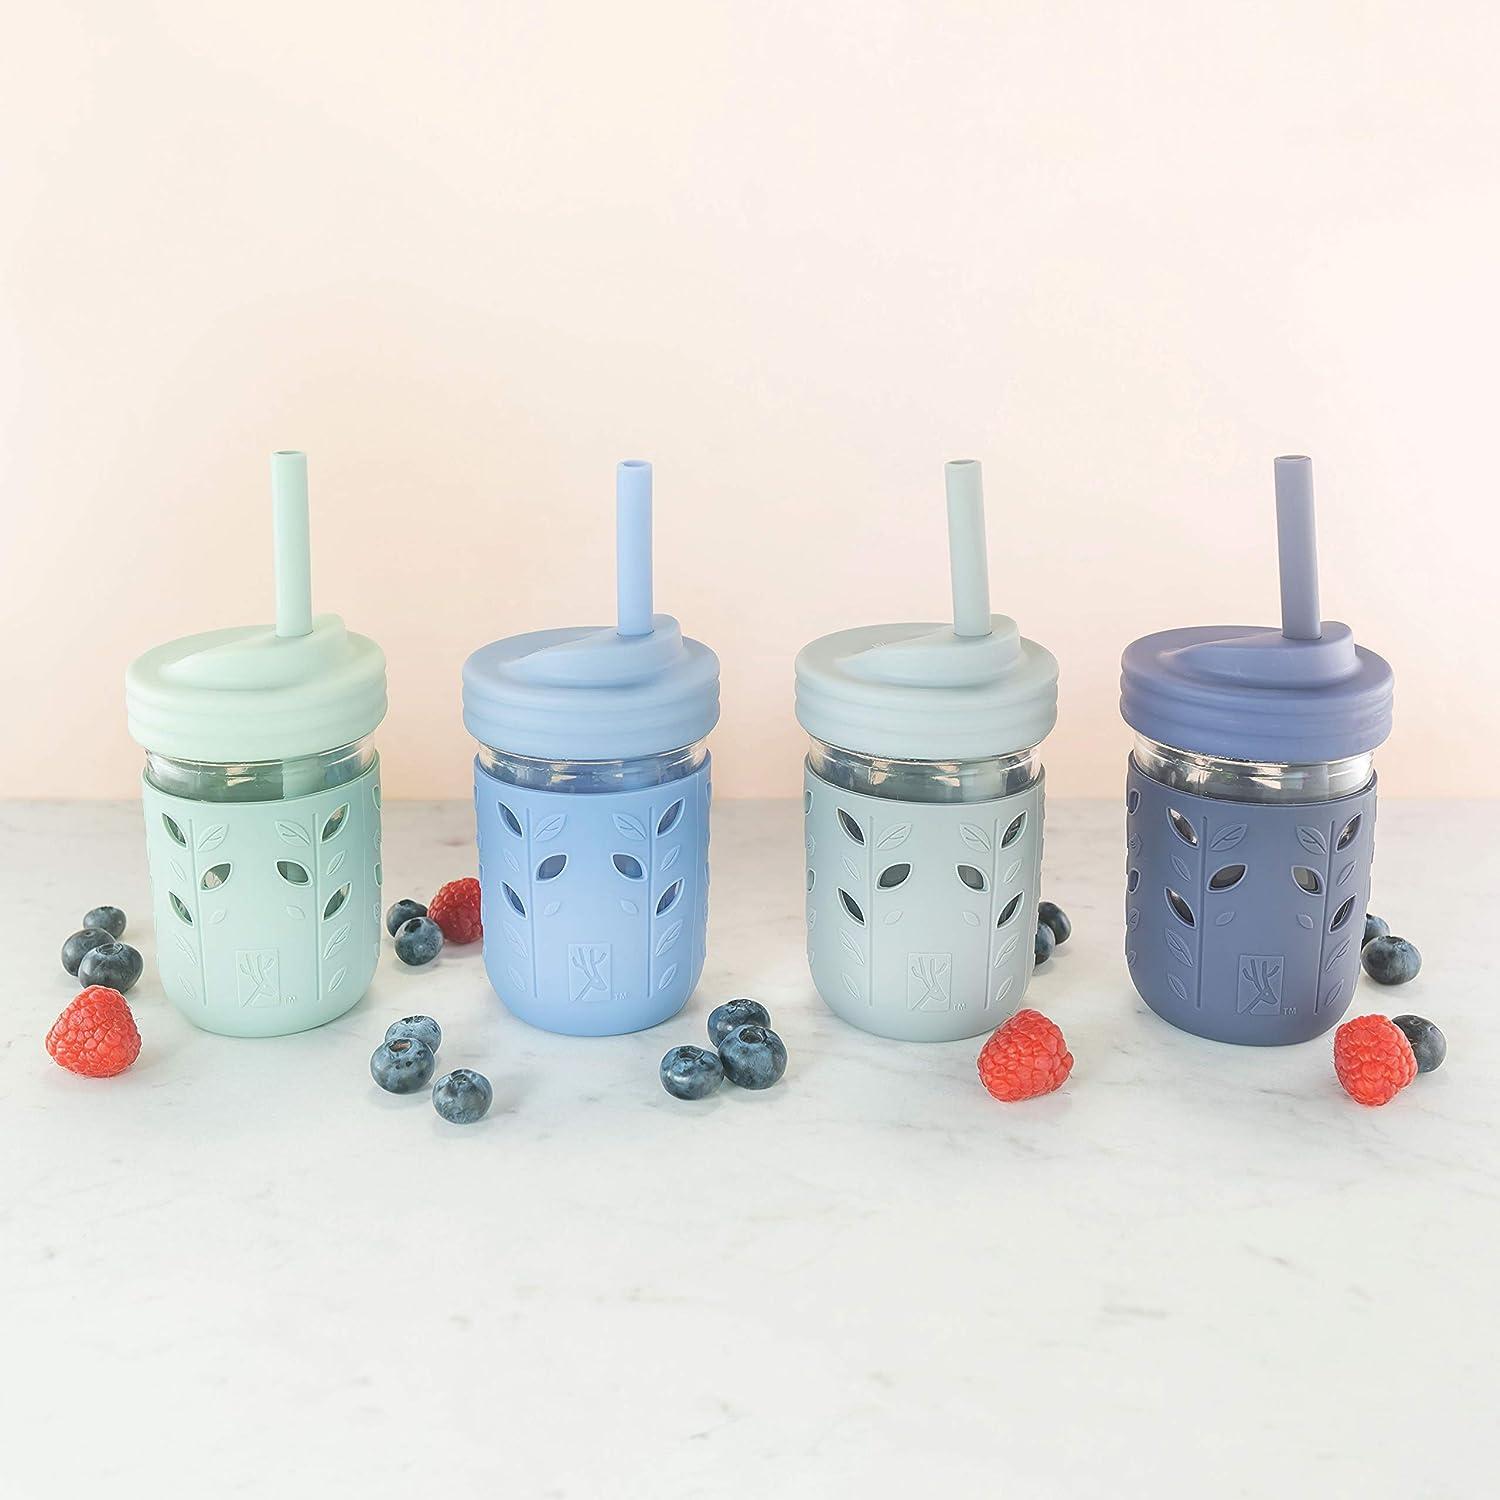 My favorite toddler smoothie cups, Elk and Friends